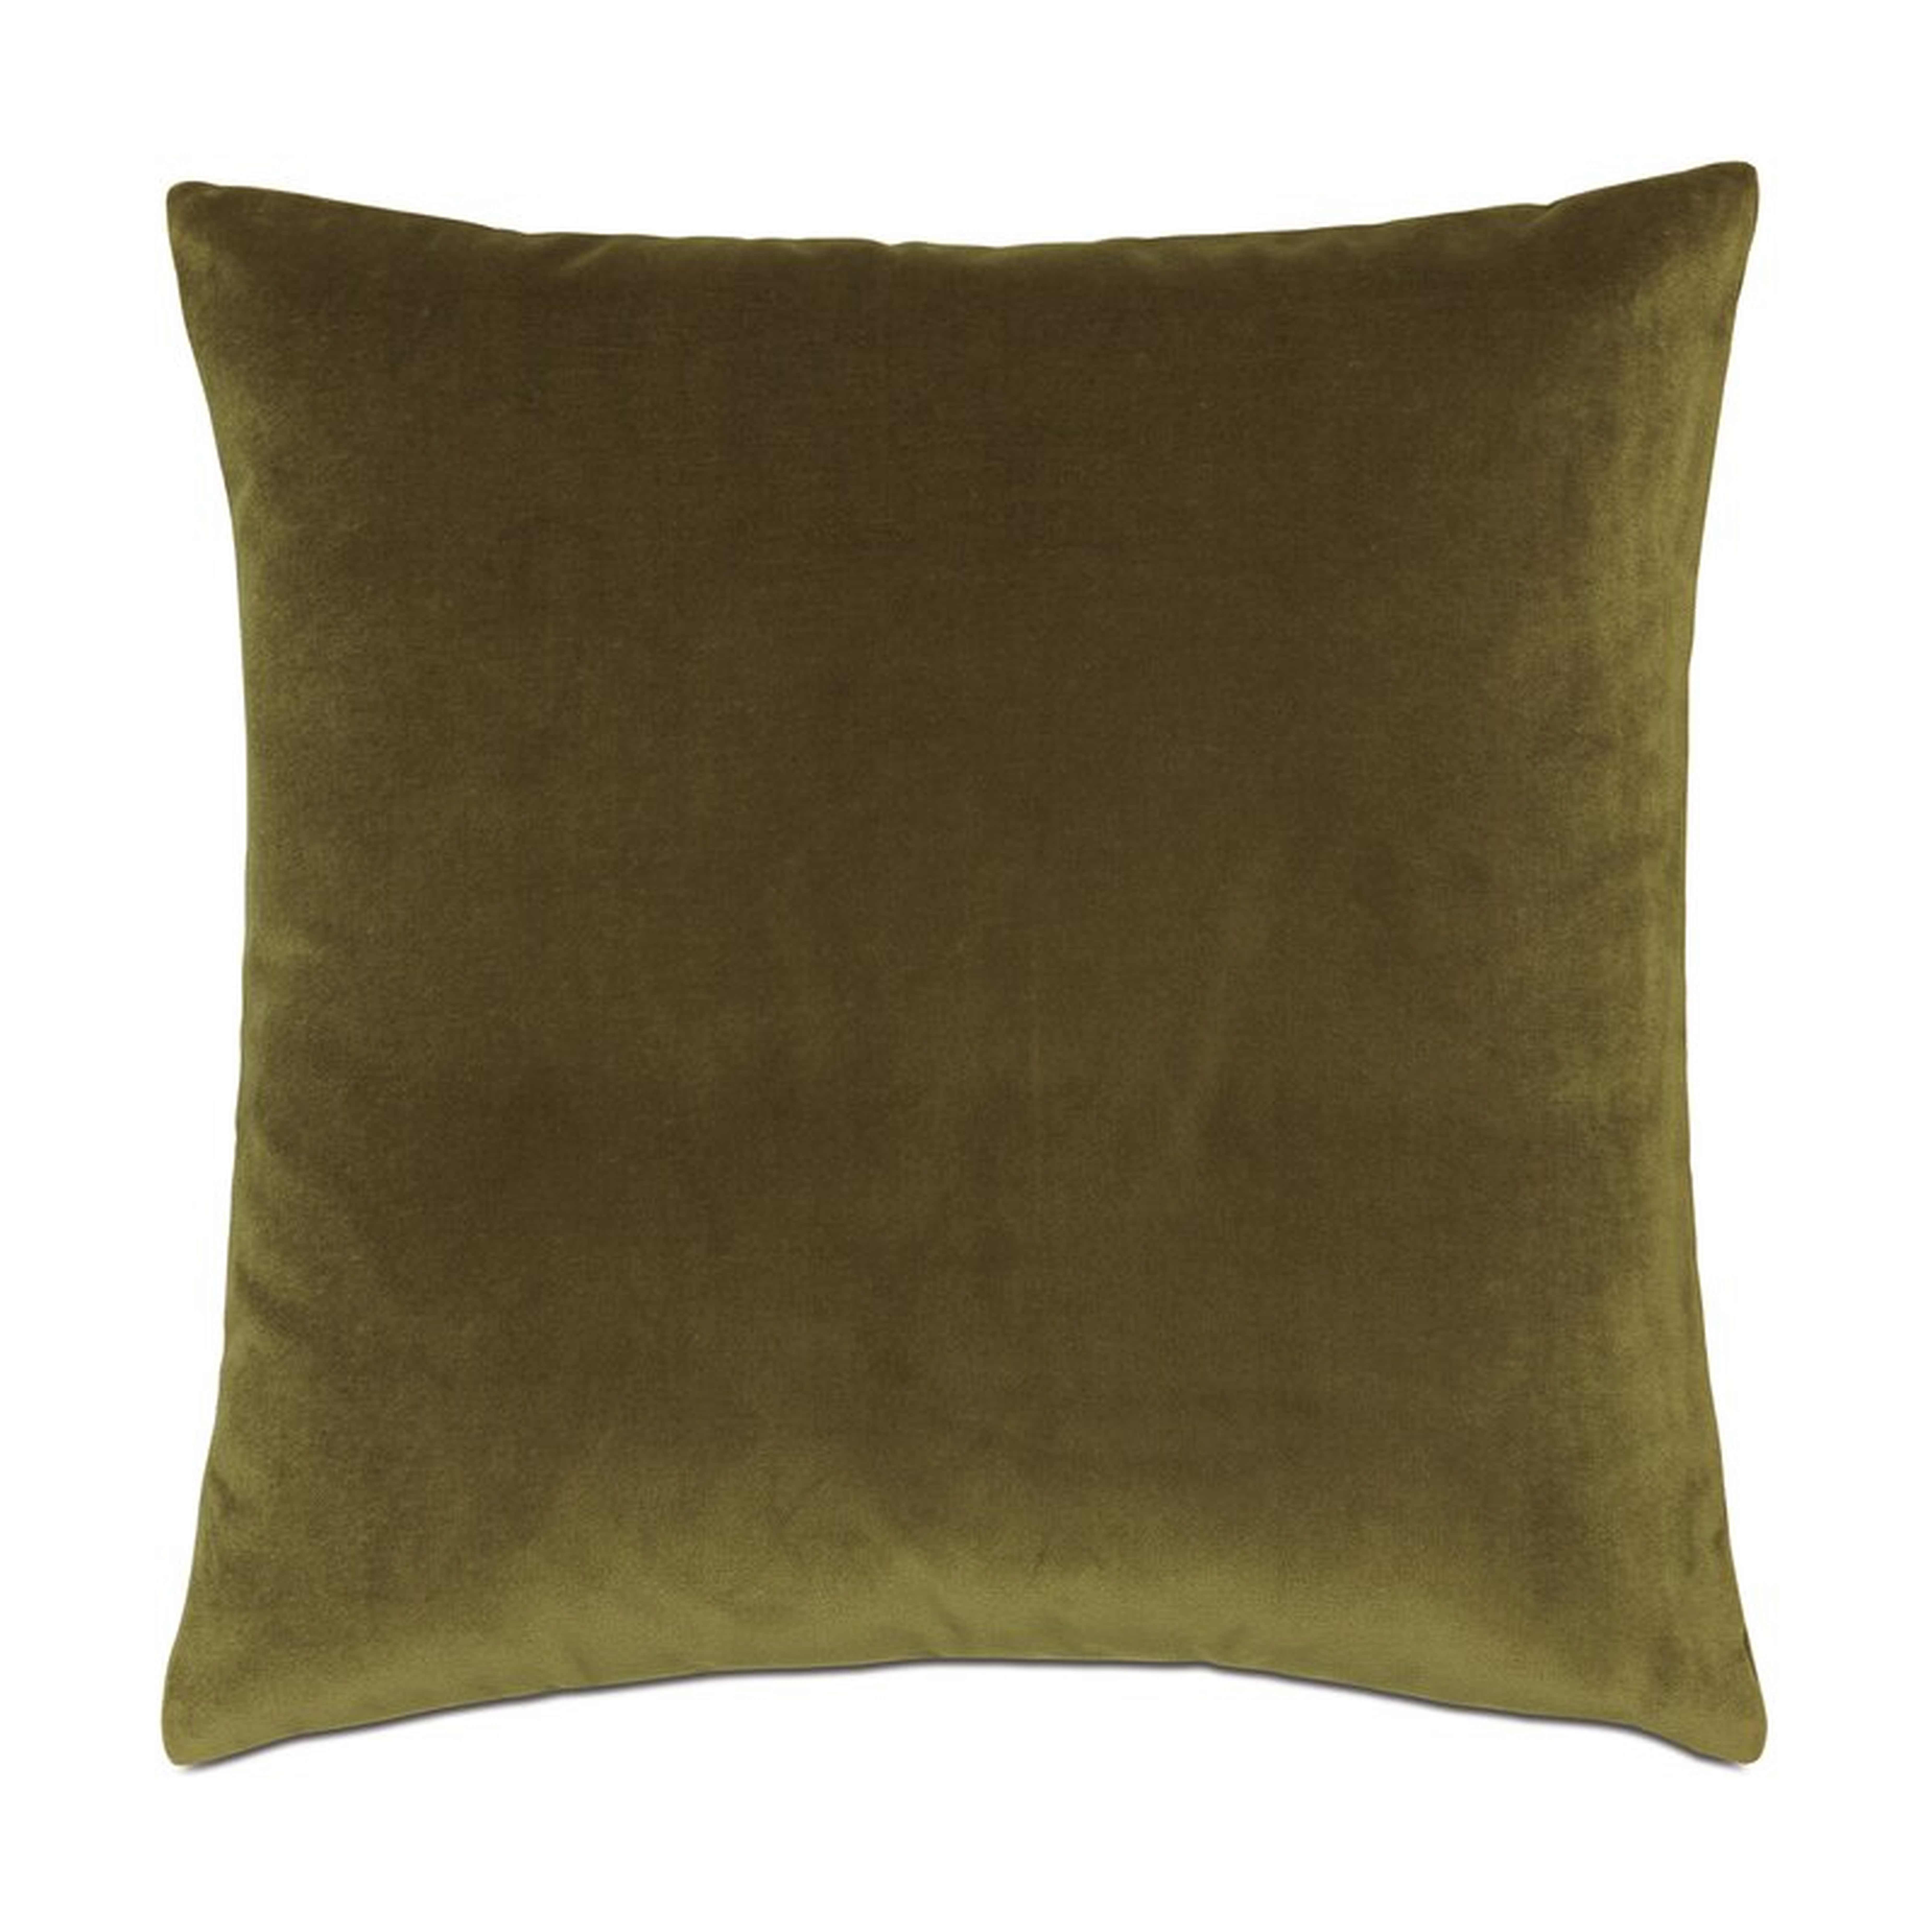 Eastern Accents Plush Throw Pillow Cover & Insert - Perigold